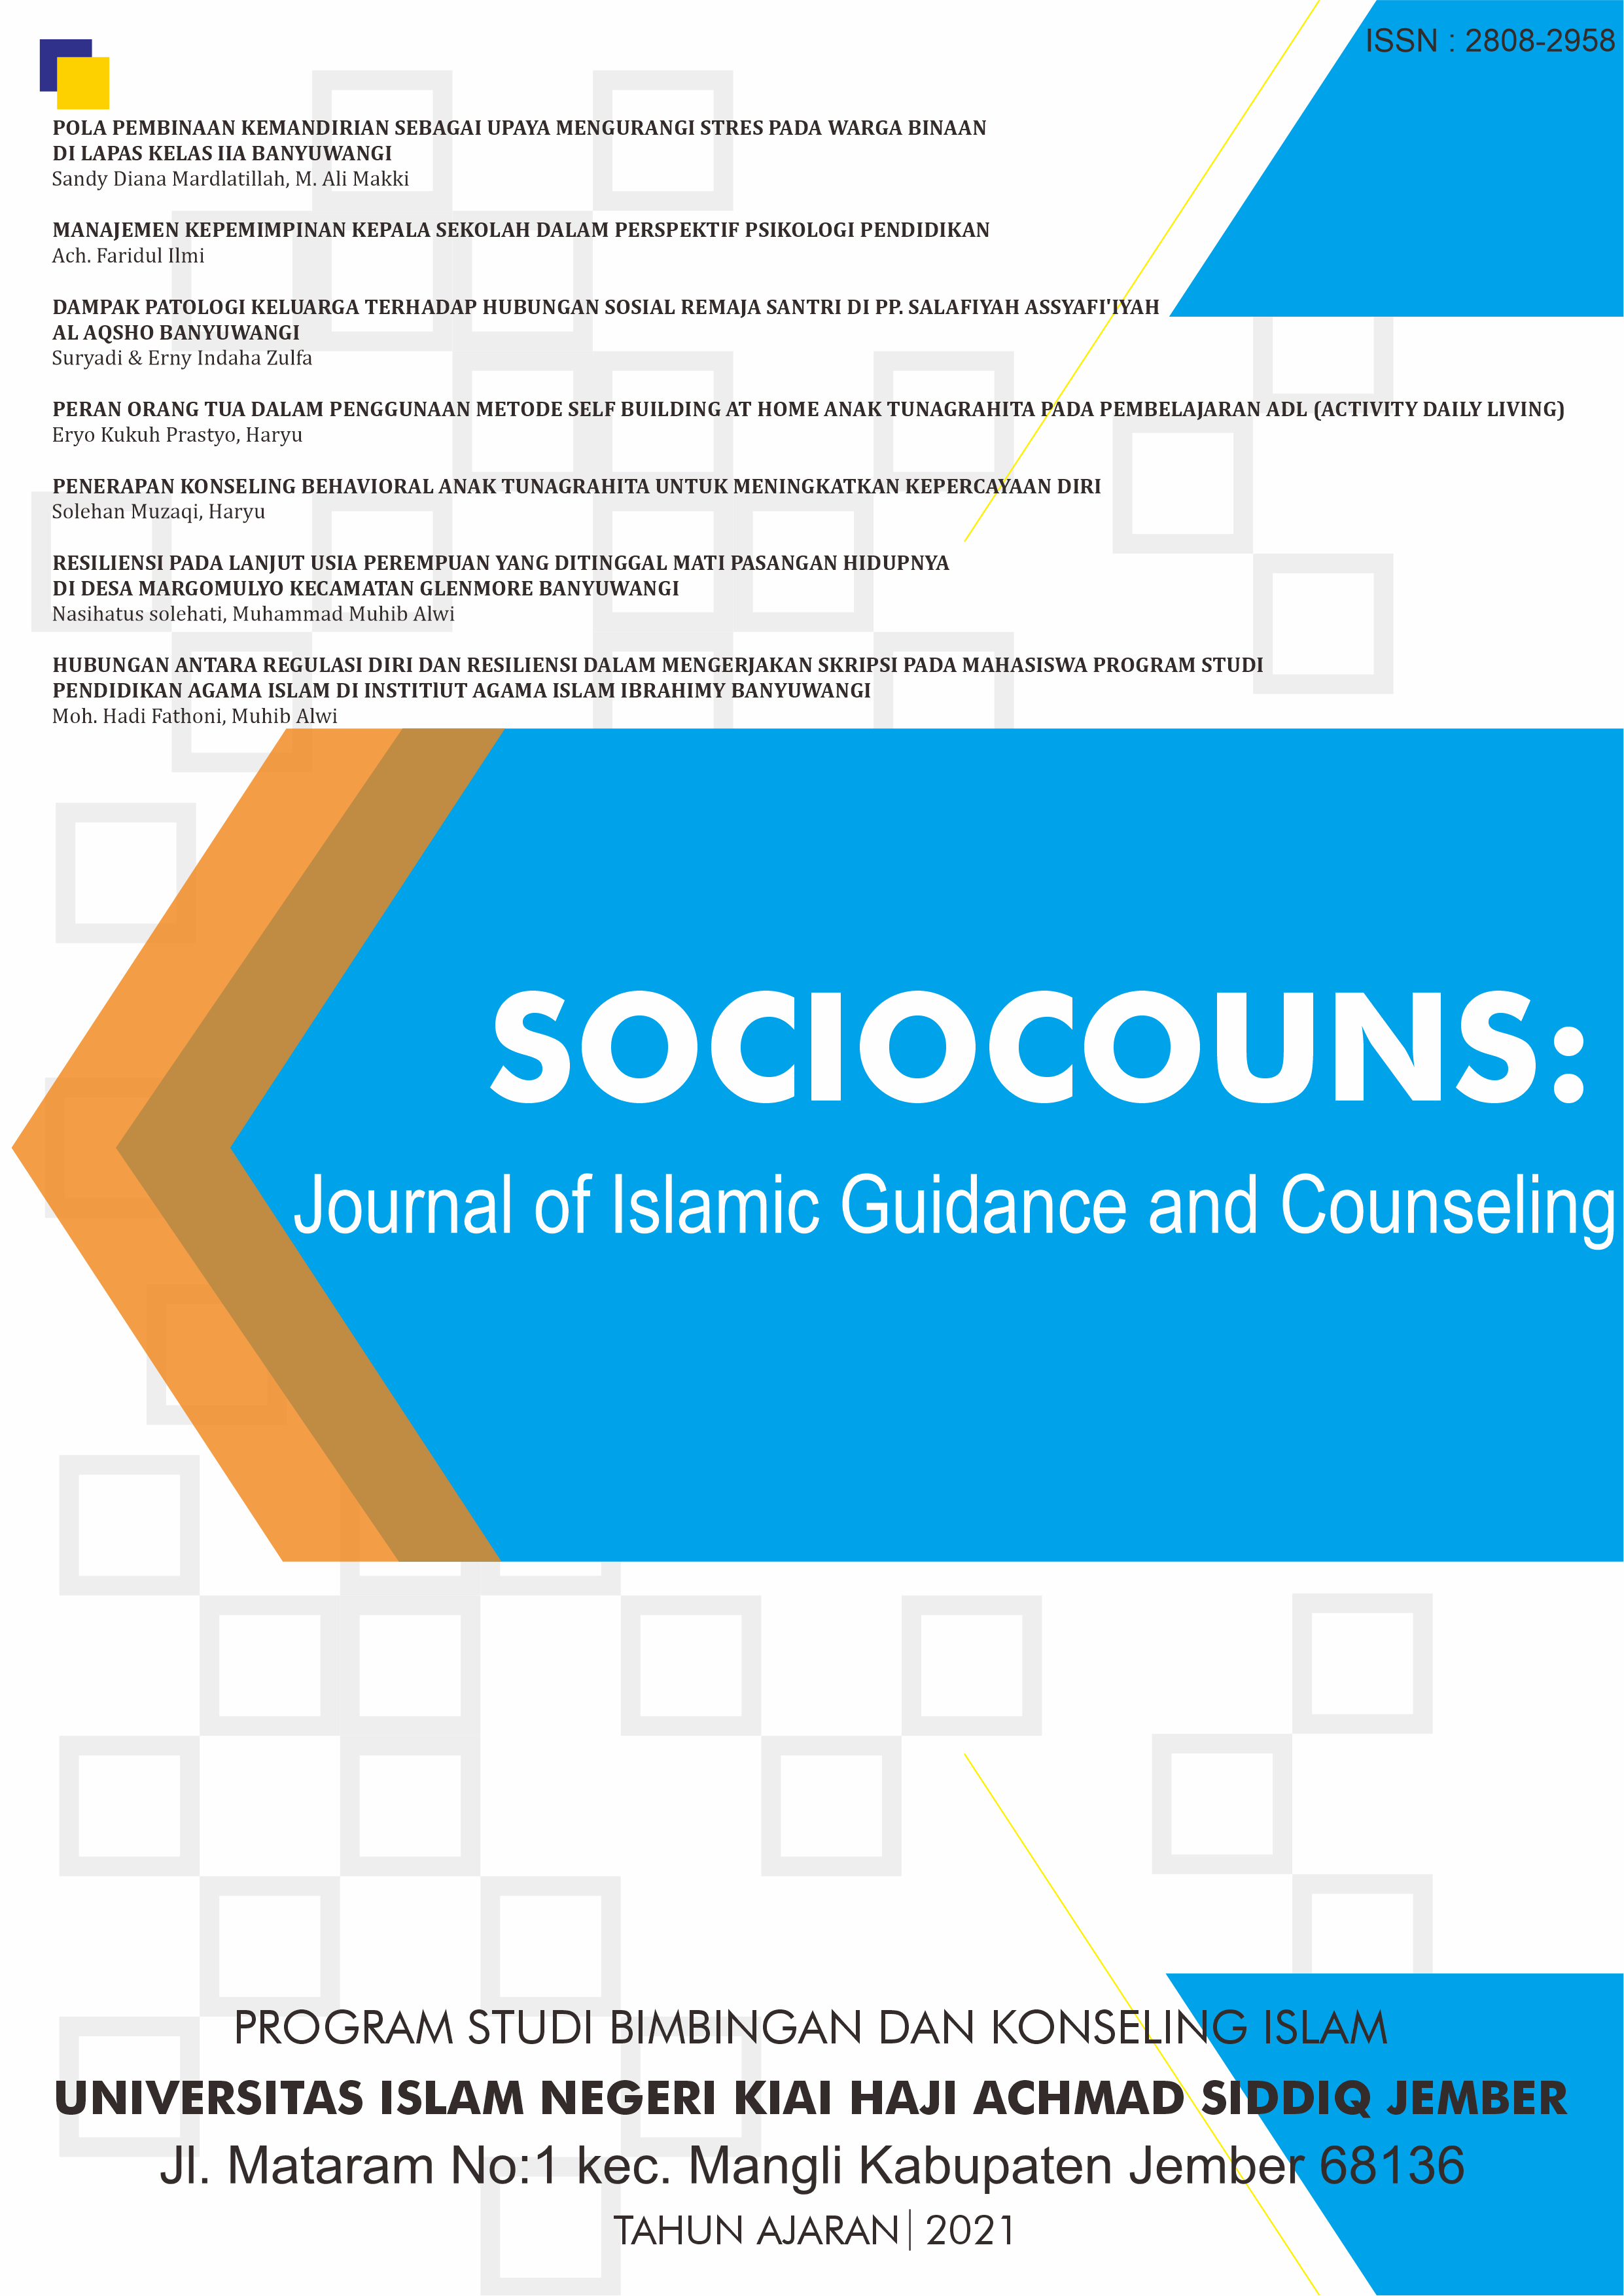 					View Vol. 1 No. 1 (2021): Sociocouns: Journal of Islamic Guidance and Counseling
				